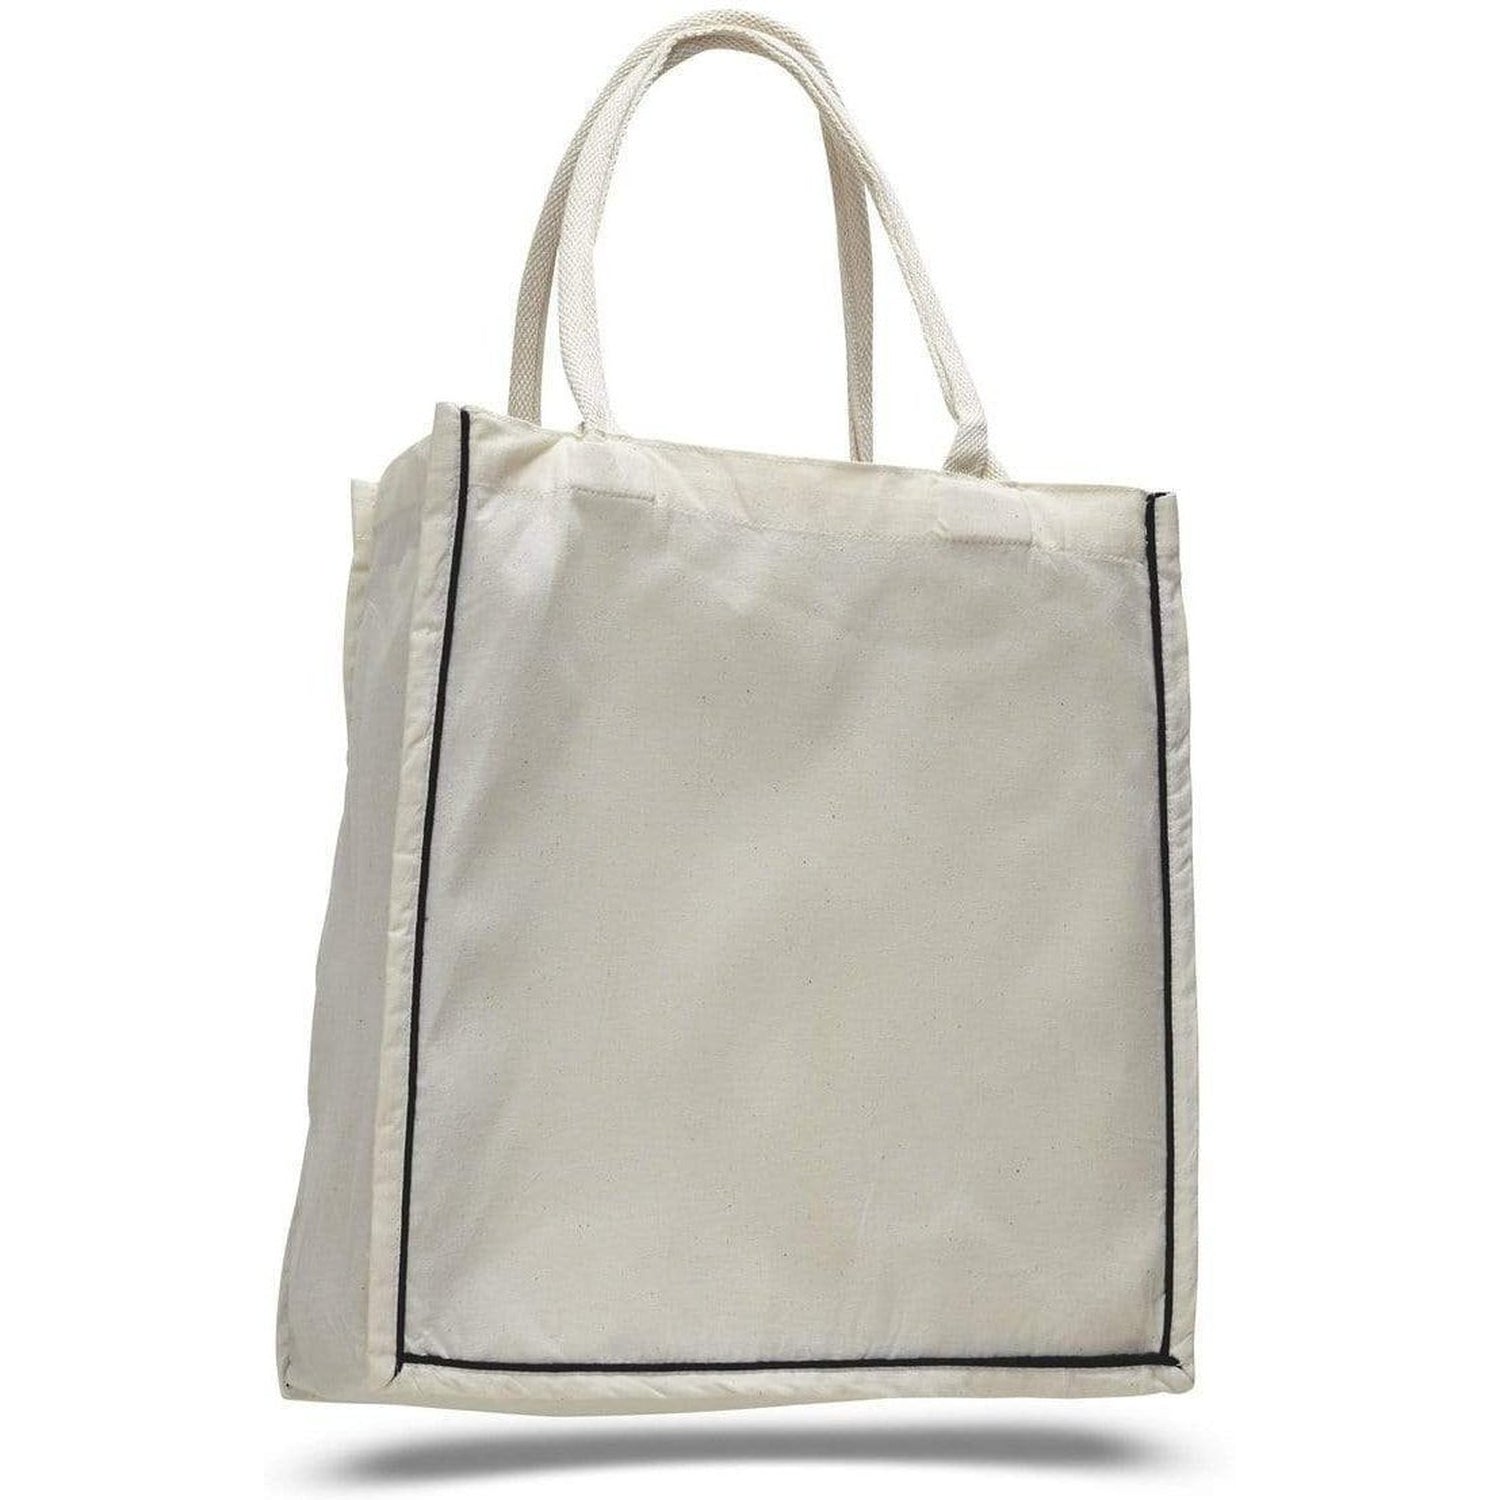 Cotton Canvas Tote Bags Wholesale, Cheap Tote Bags in Bulk – BagzDepot™